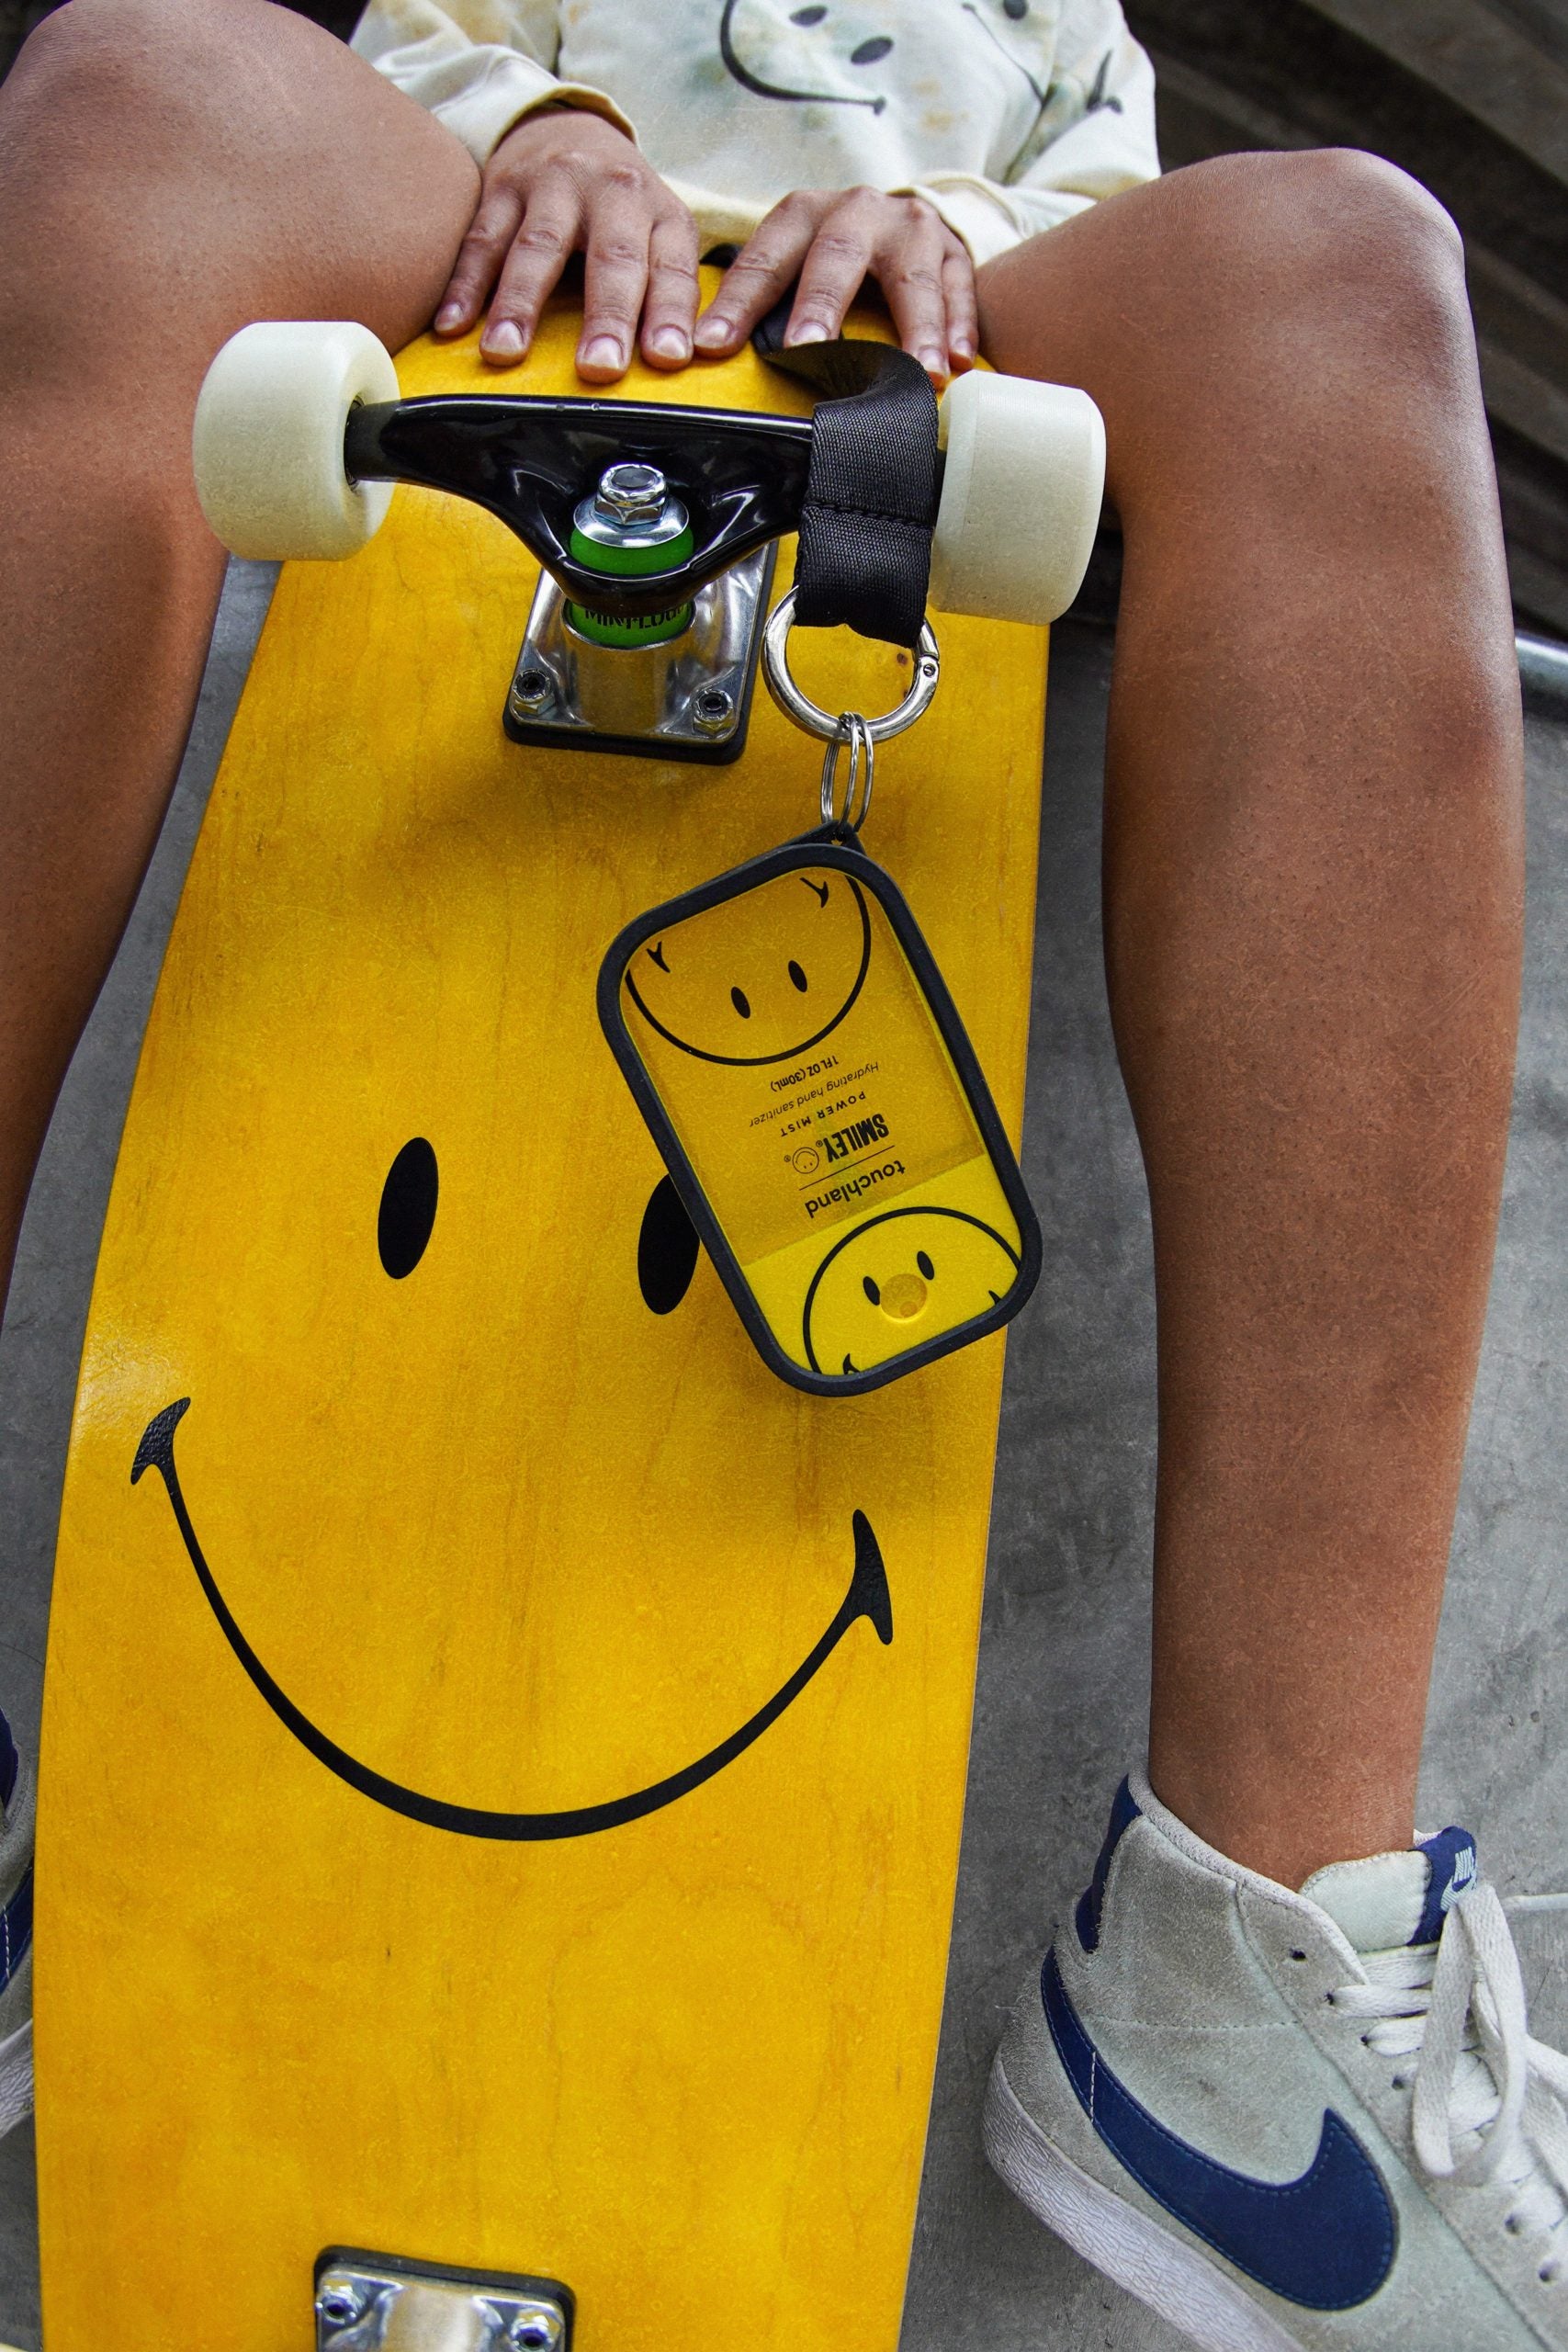 Touchland x Smiley hand sanitiser hooked on to a Smiley skateboard.